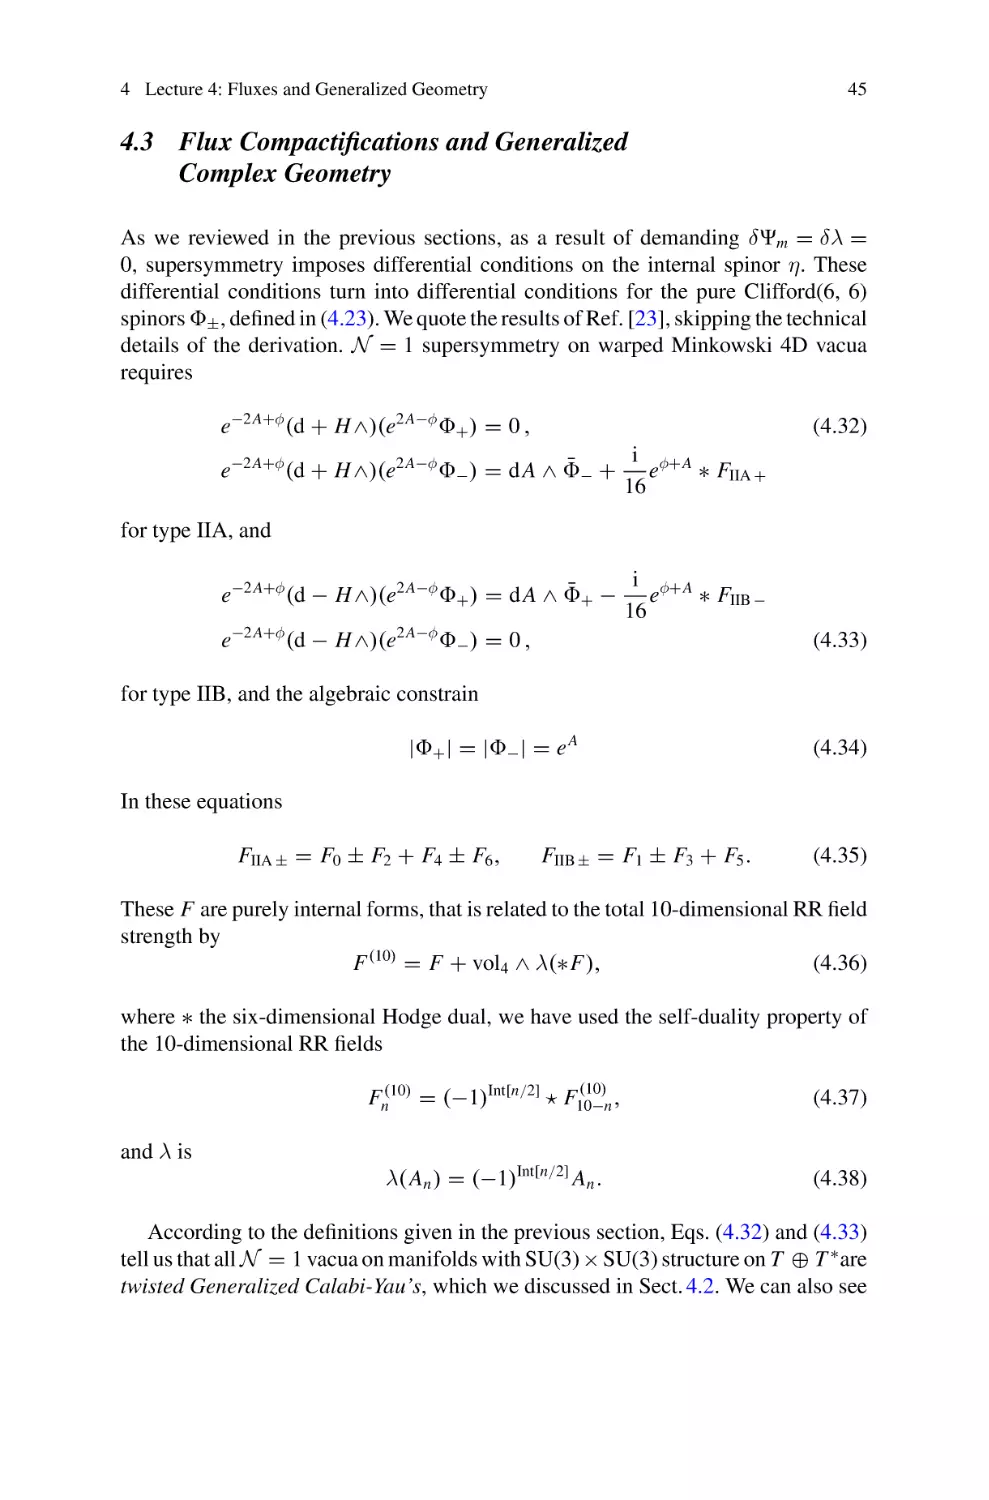 4.3 Flux Compactifications and Generalized  Complex Geometry